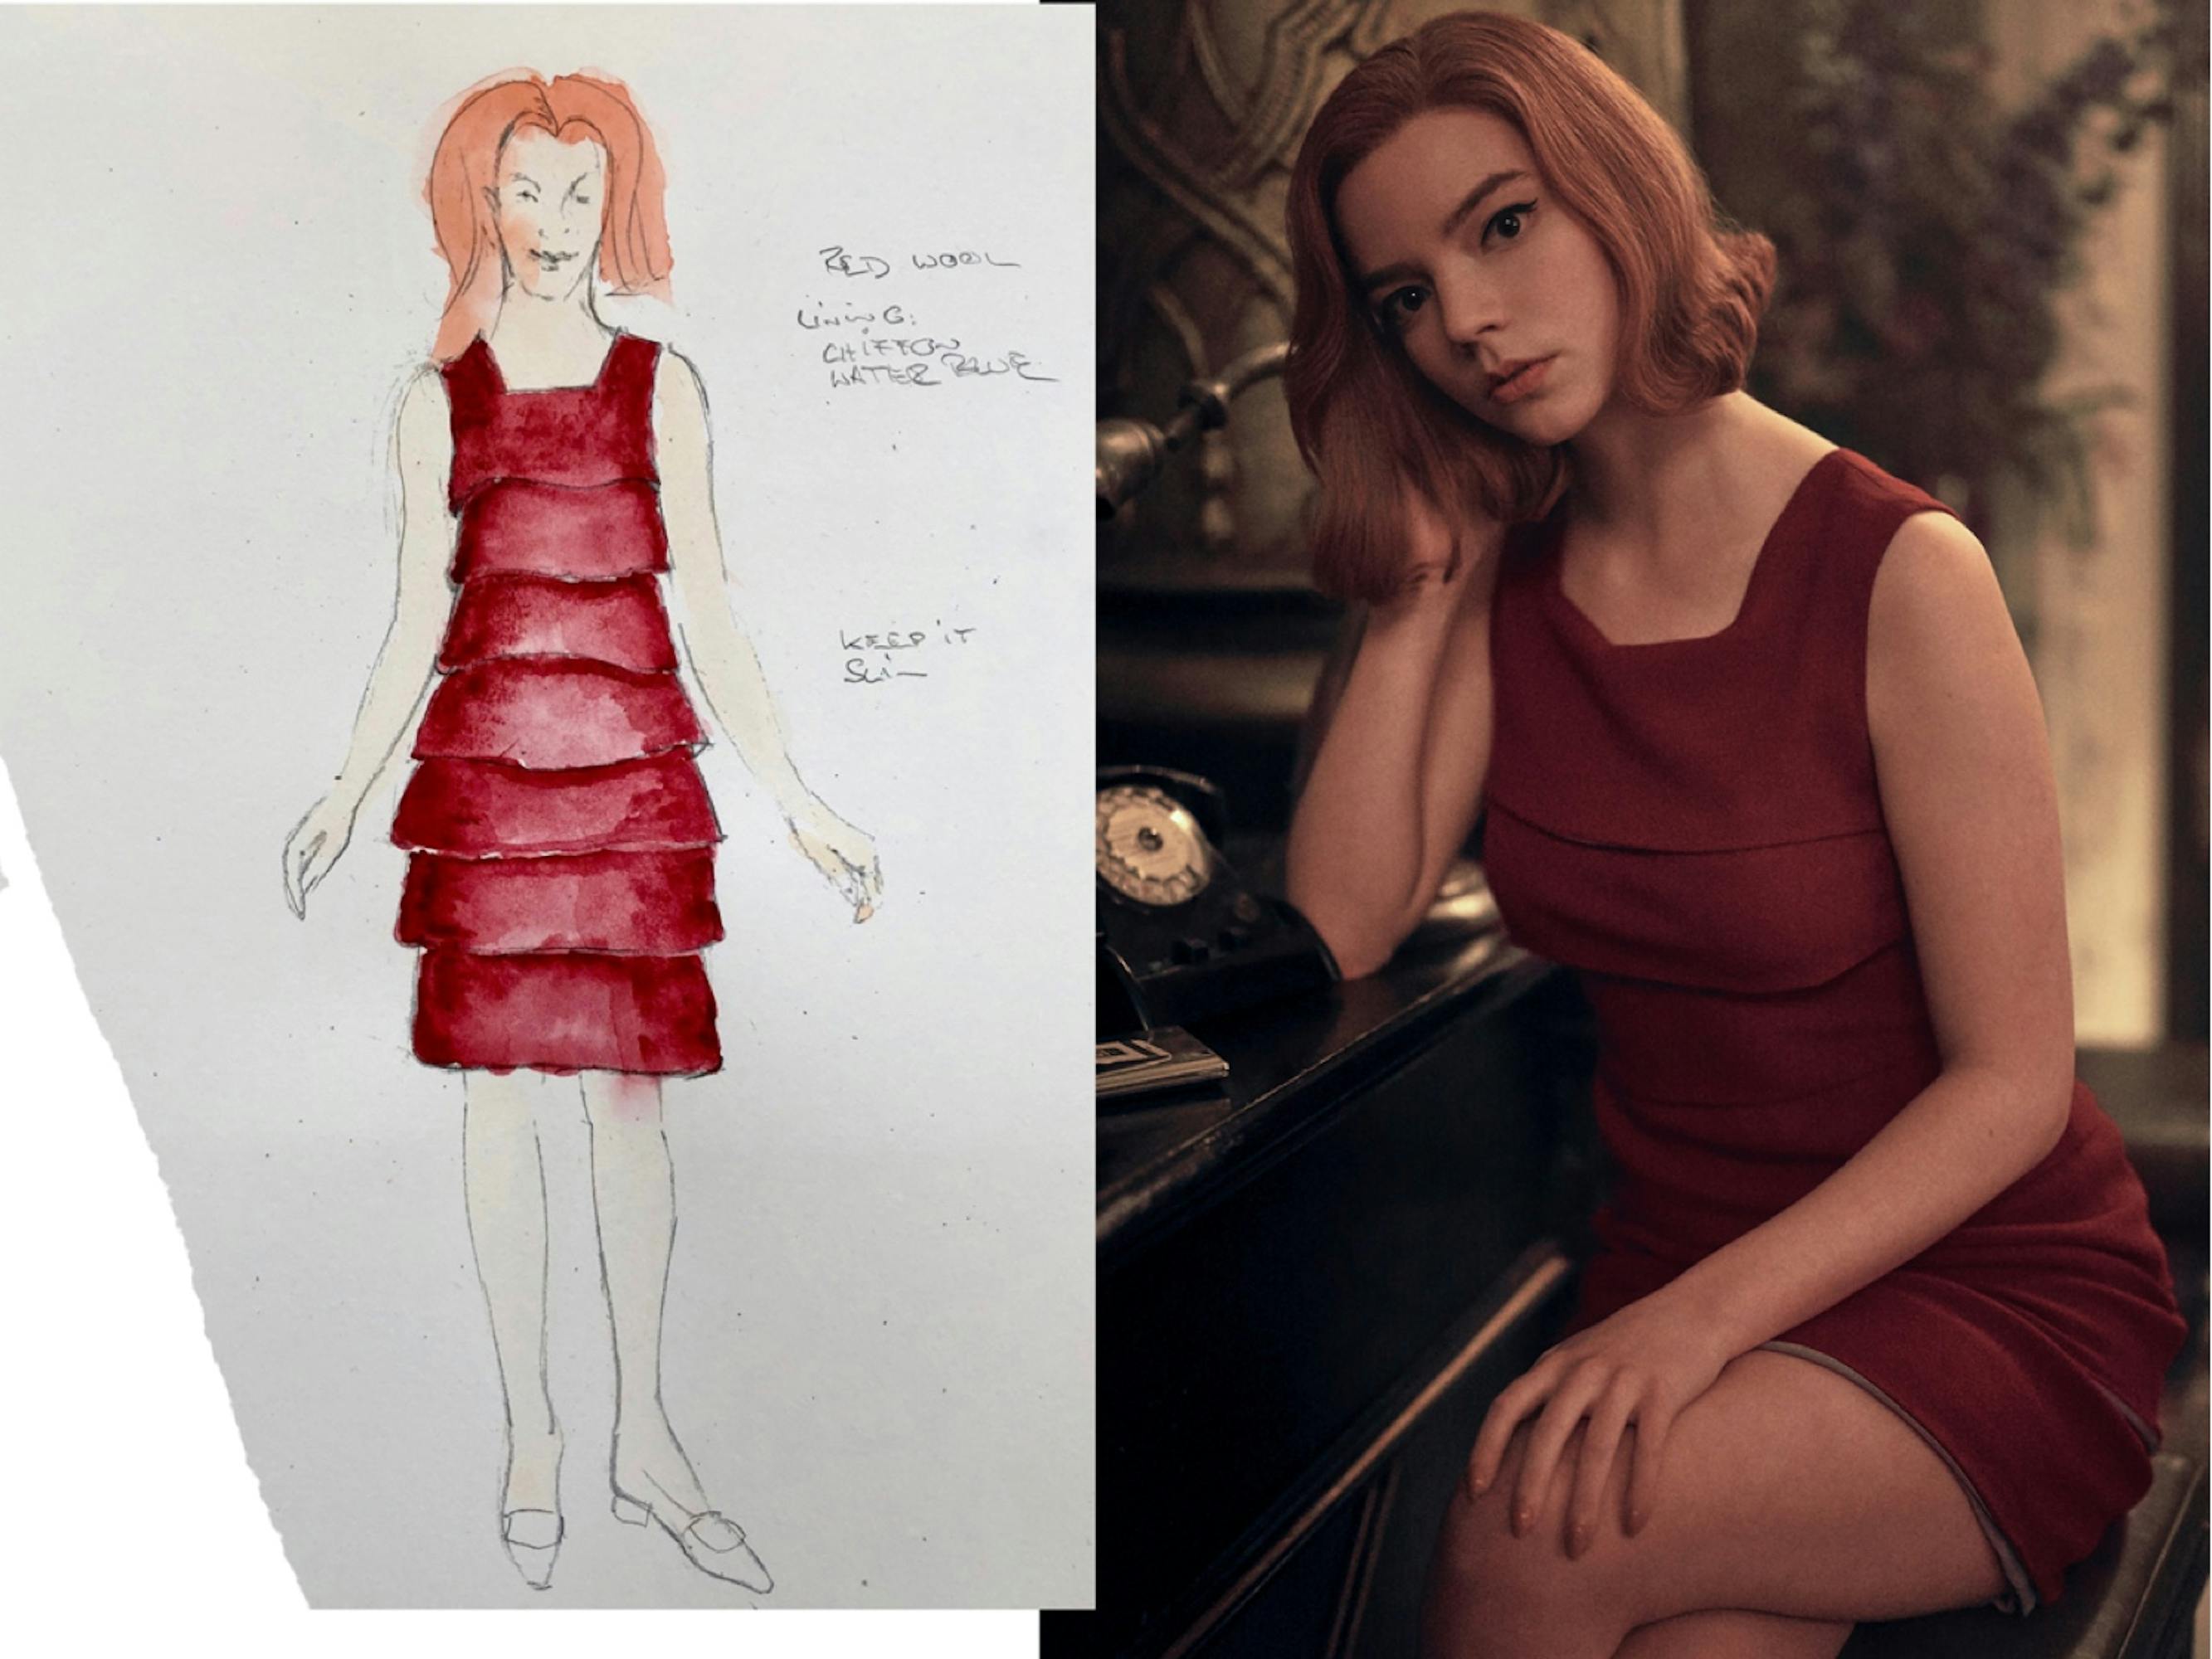 Beth cuts a stylish figure in a crimson crepe dress. A still from the series is matched with its corresponding costume sketch, the red of the dress and of Beth’s hair jumping off the page.